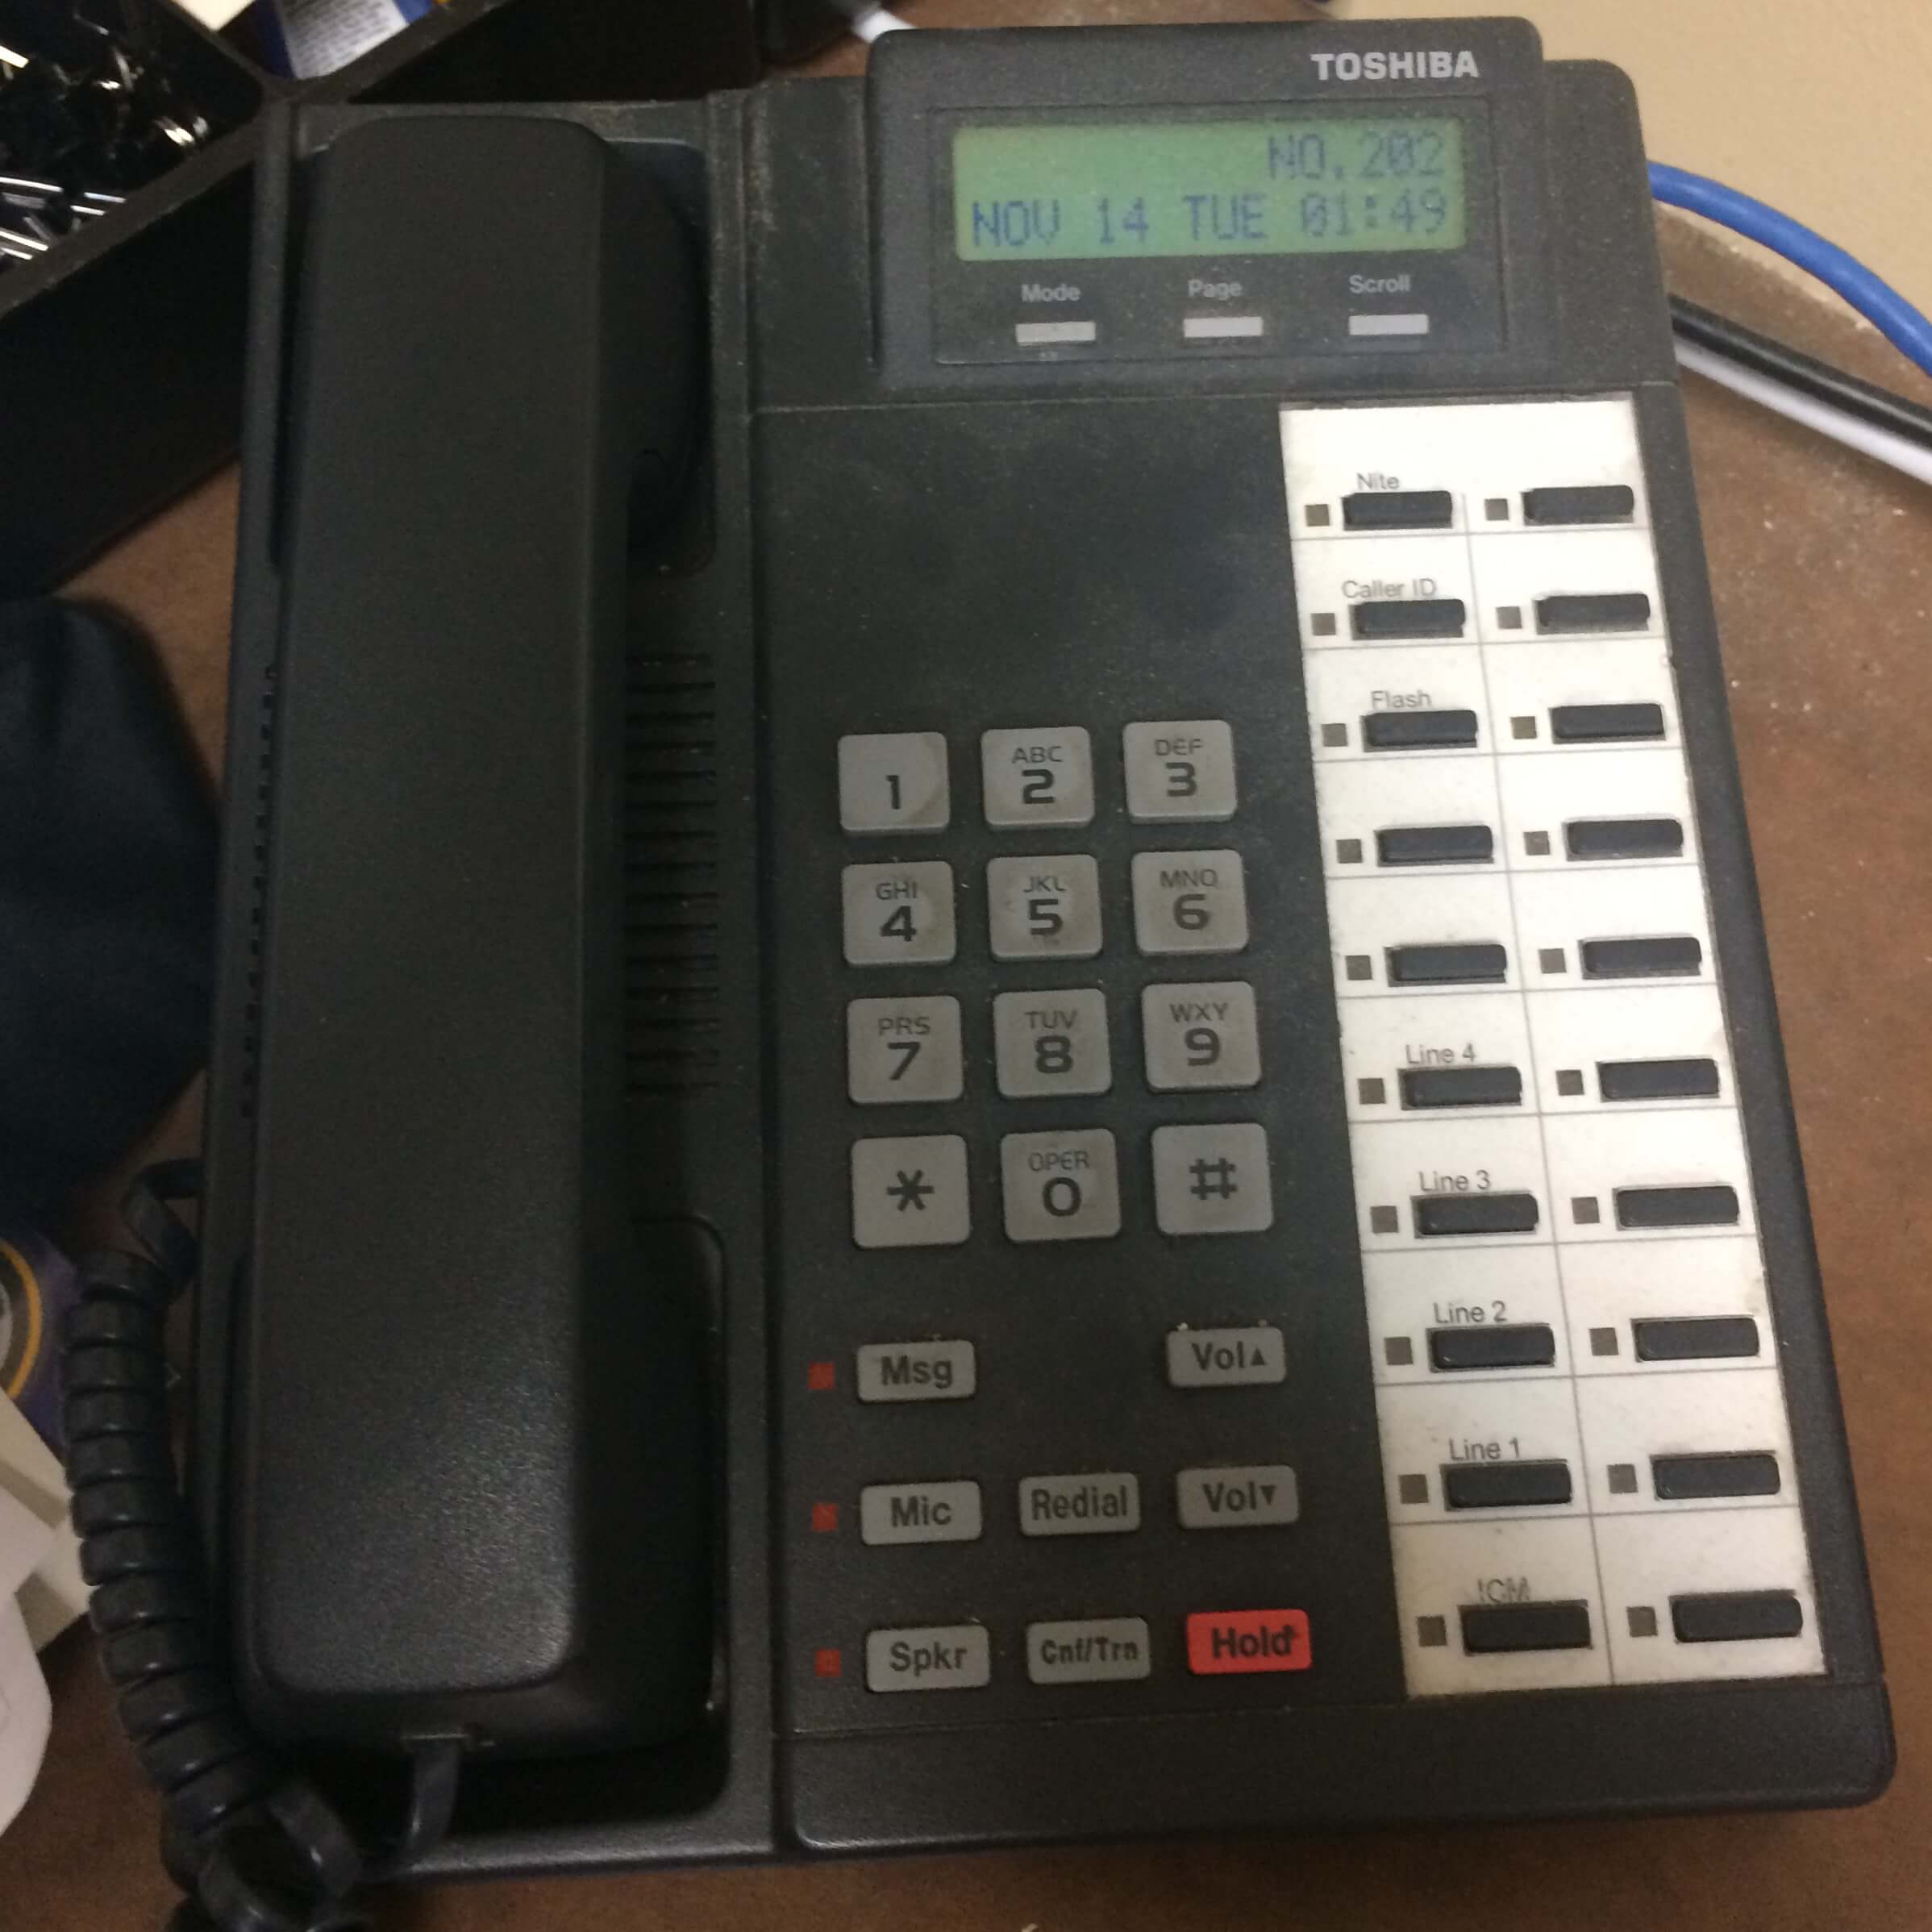 Phone System For Small Business Where You Press The Button 1 For Such And 2 For Such